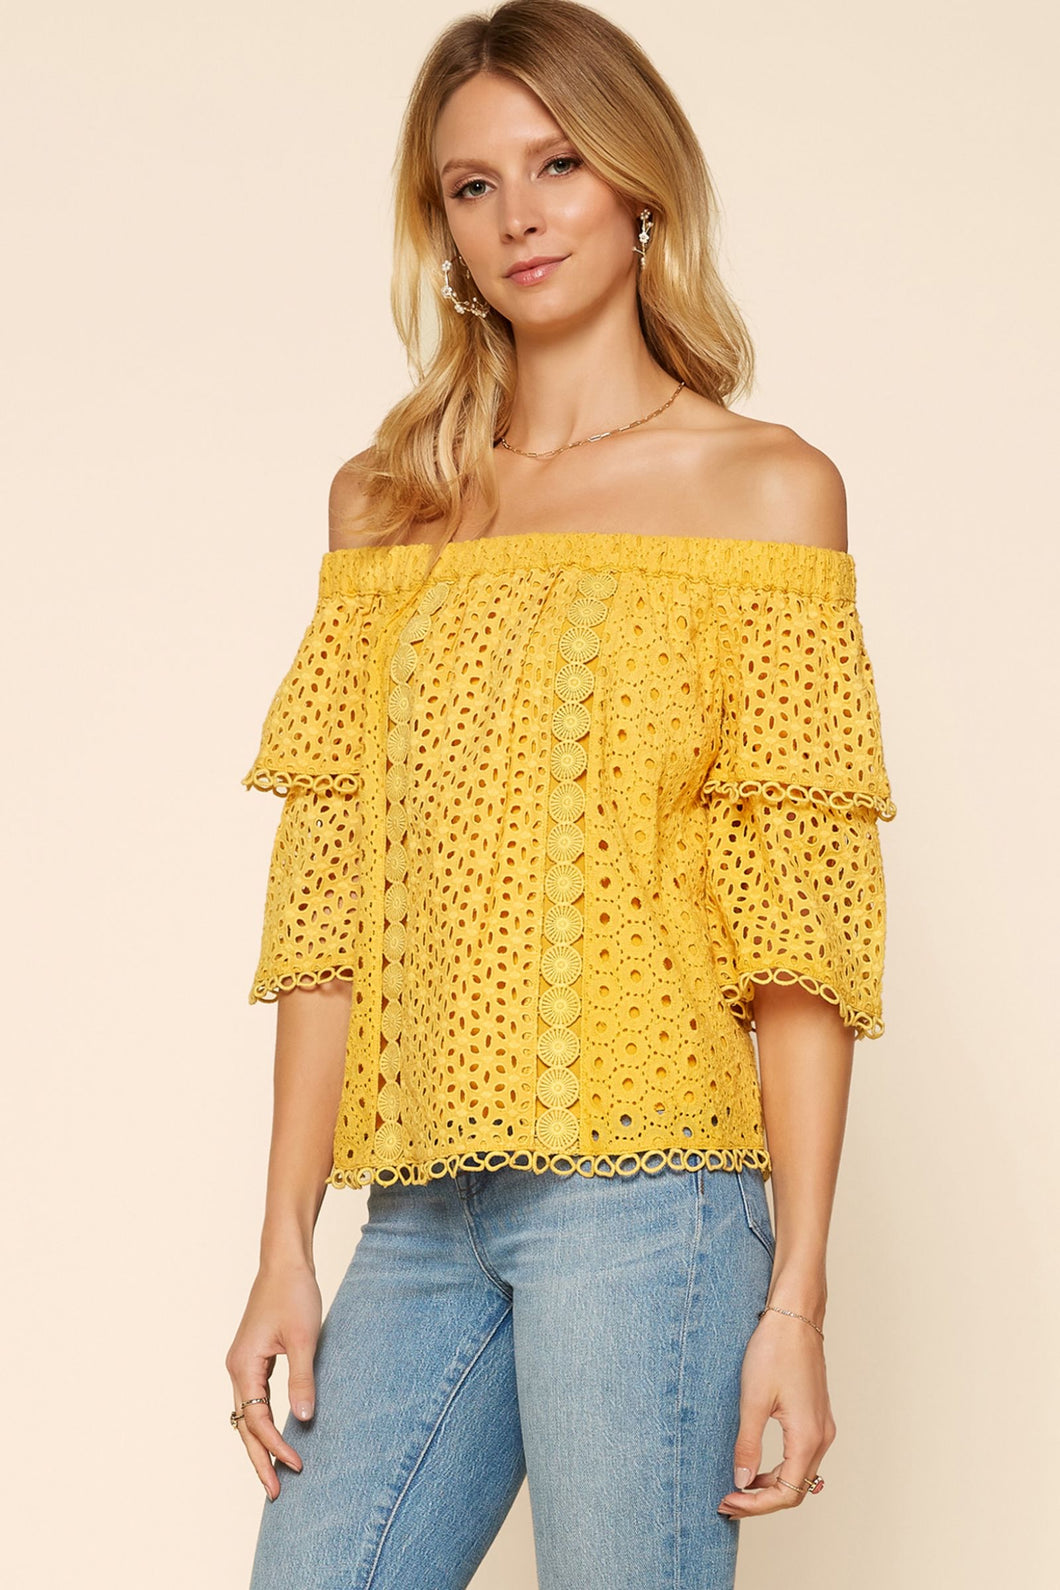 Eyelet Lace Ruffle Off the Shoulder